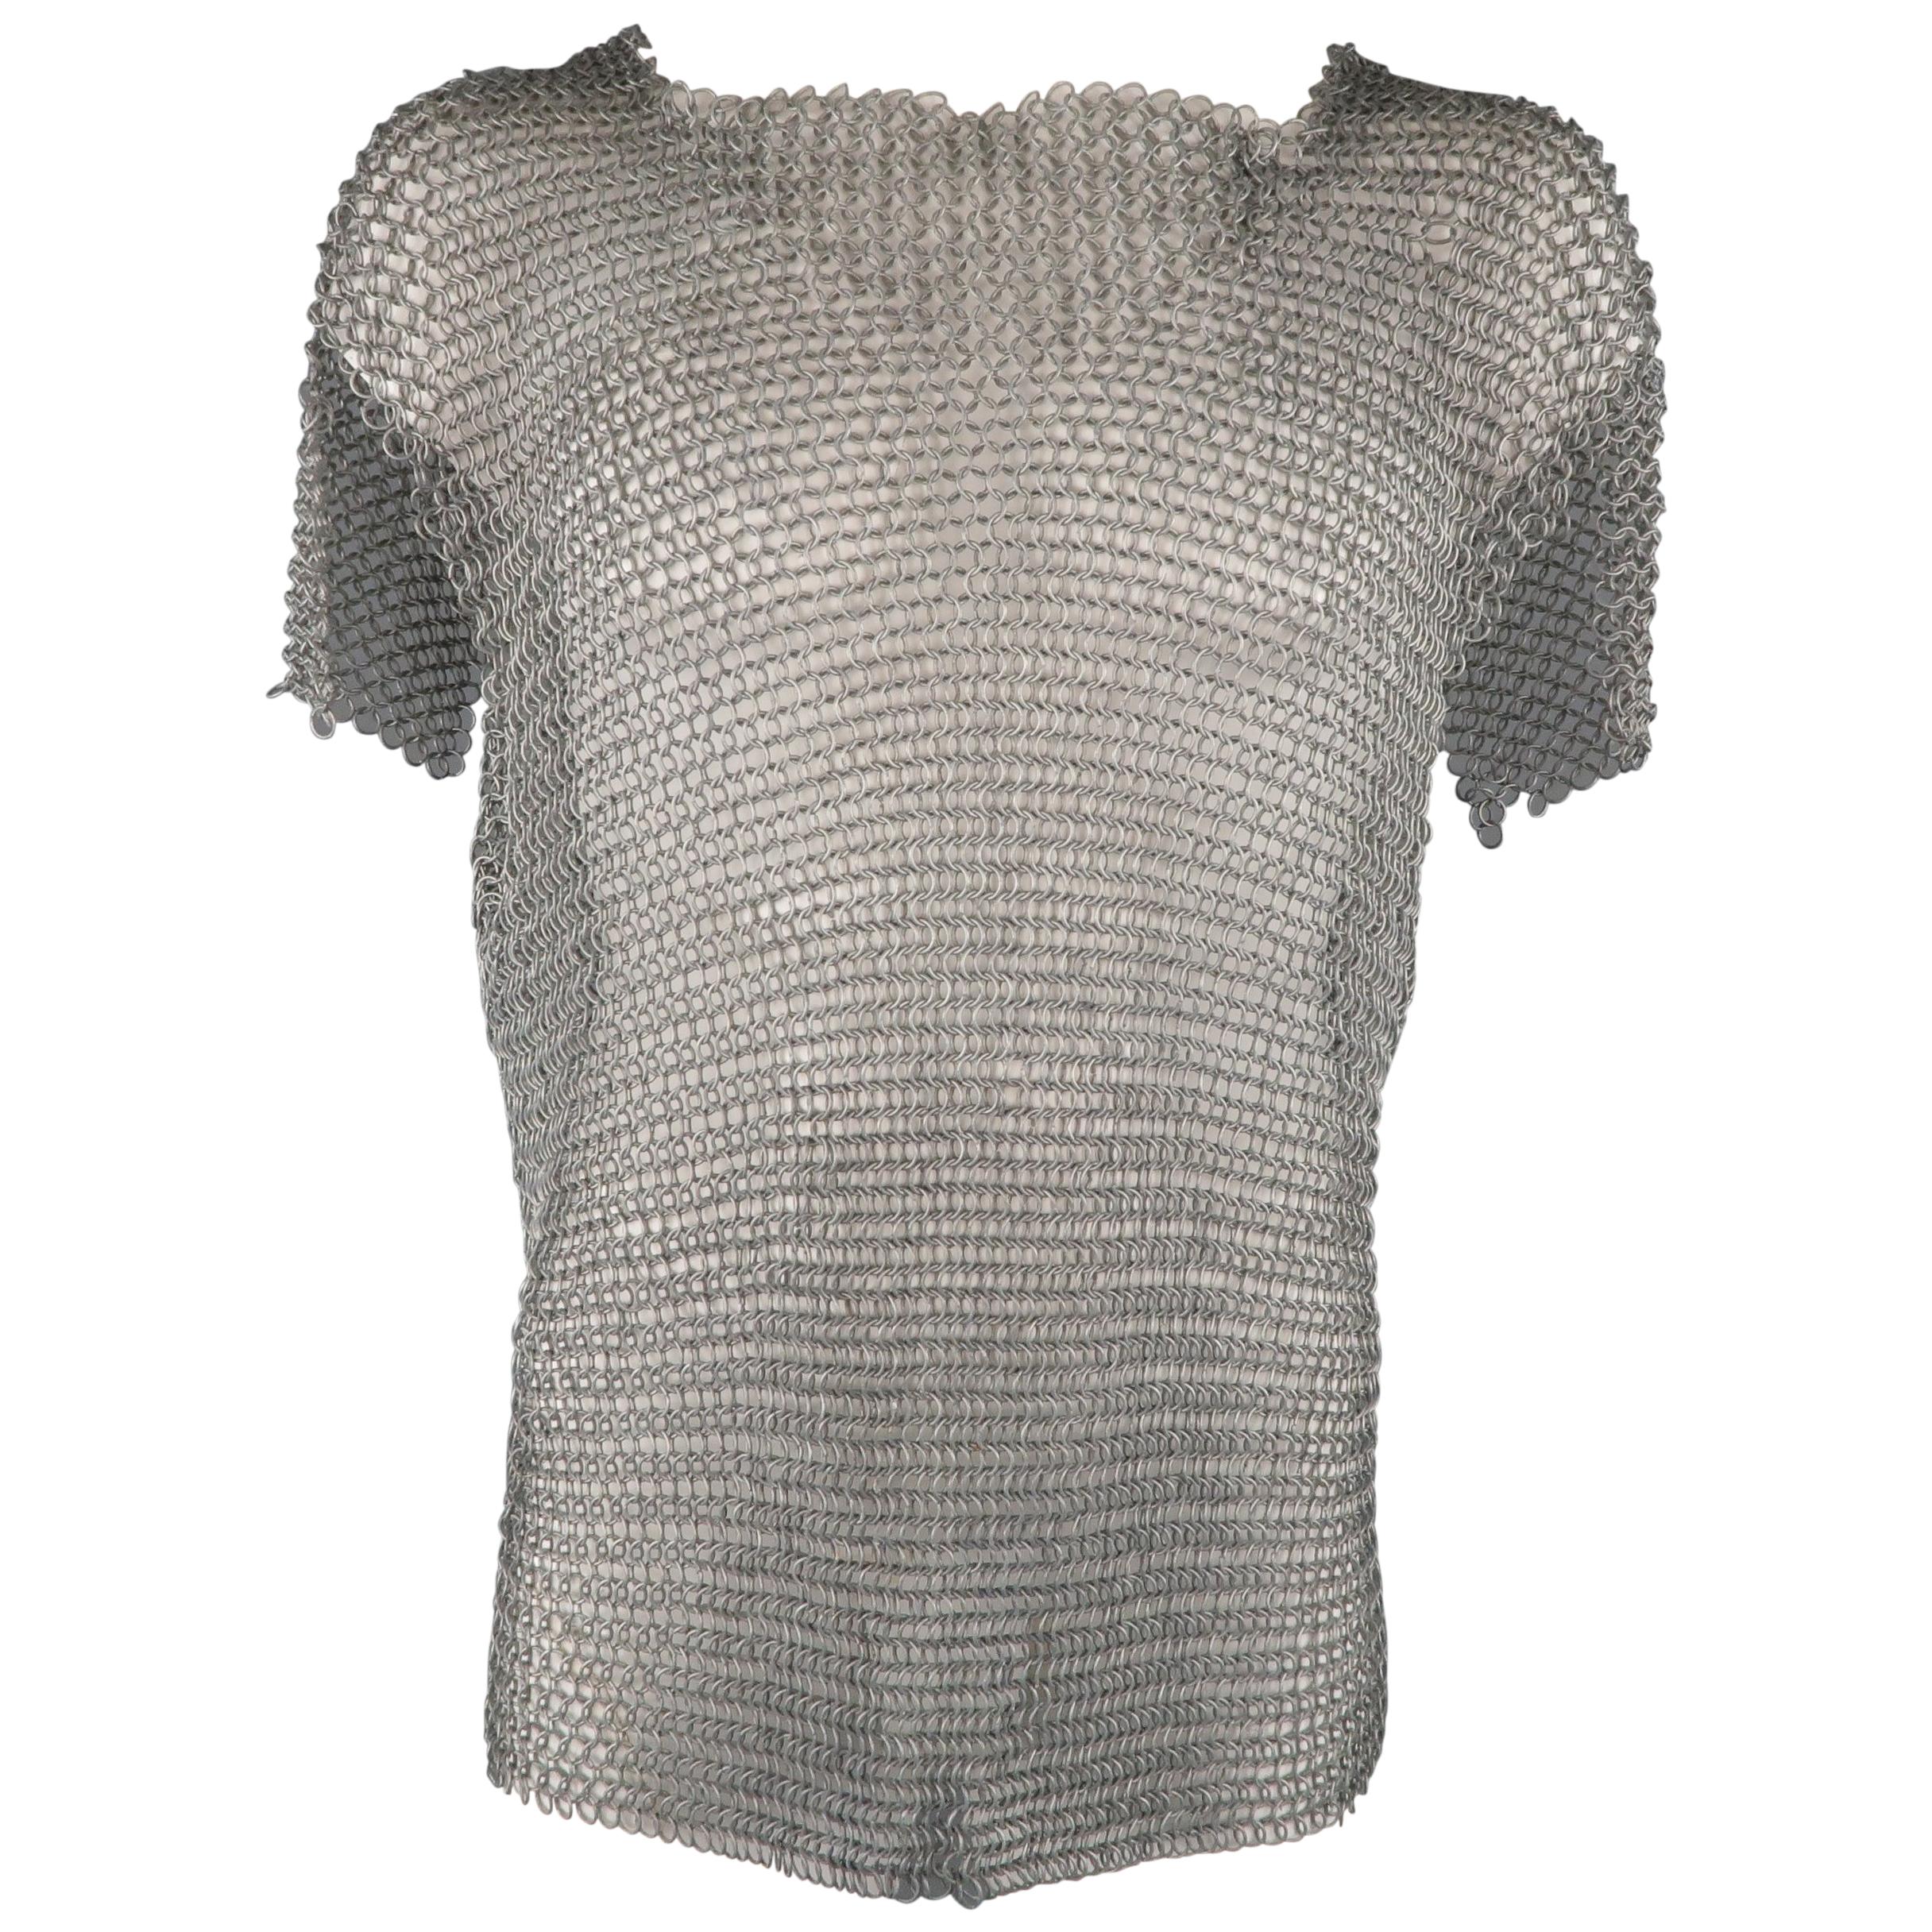 Vintage Silver Tone Metal Link Medieval Chainmail Armor Shirt